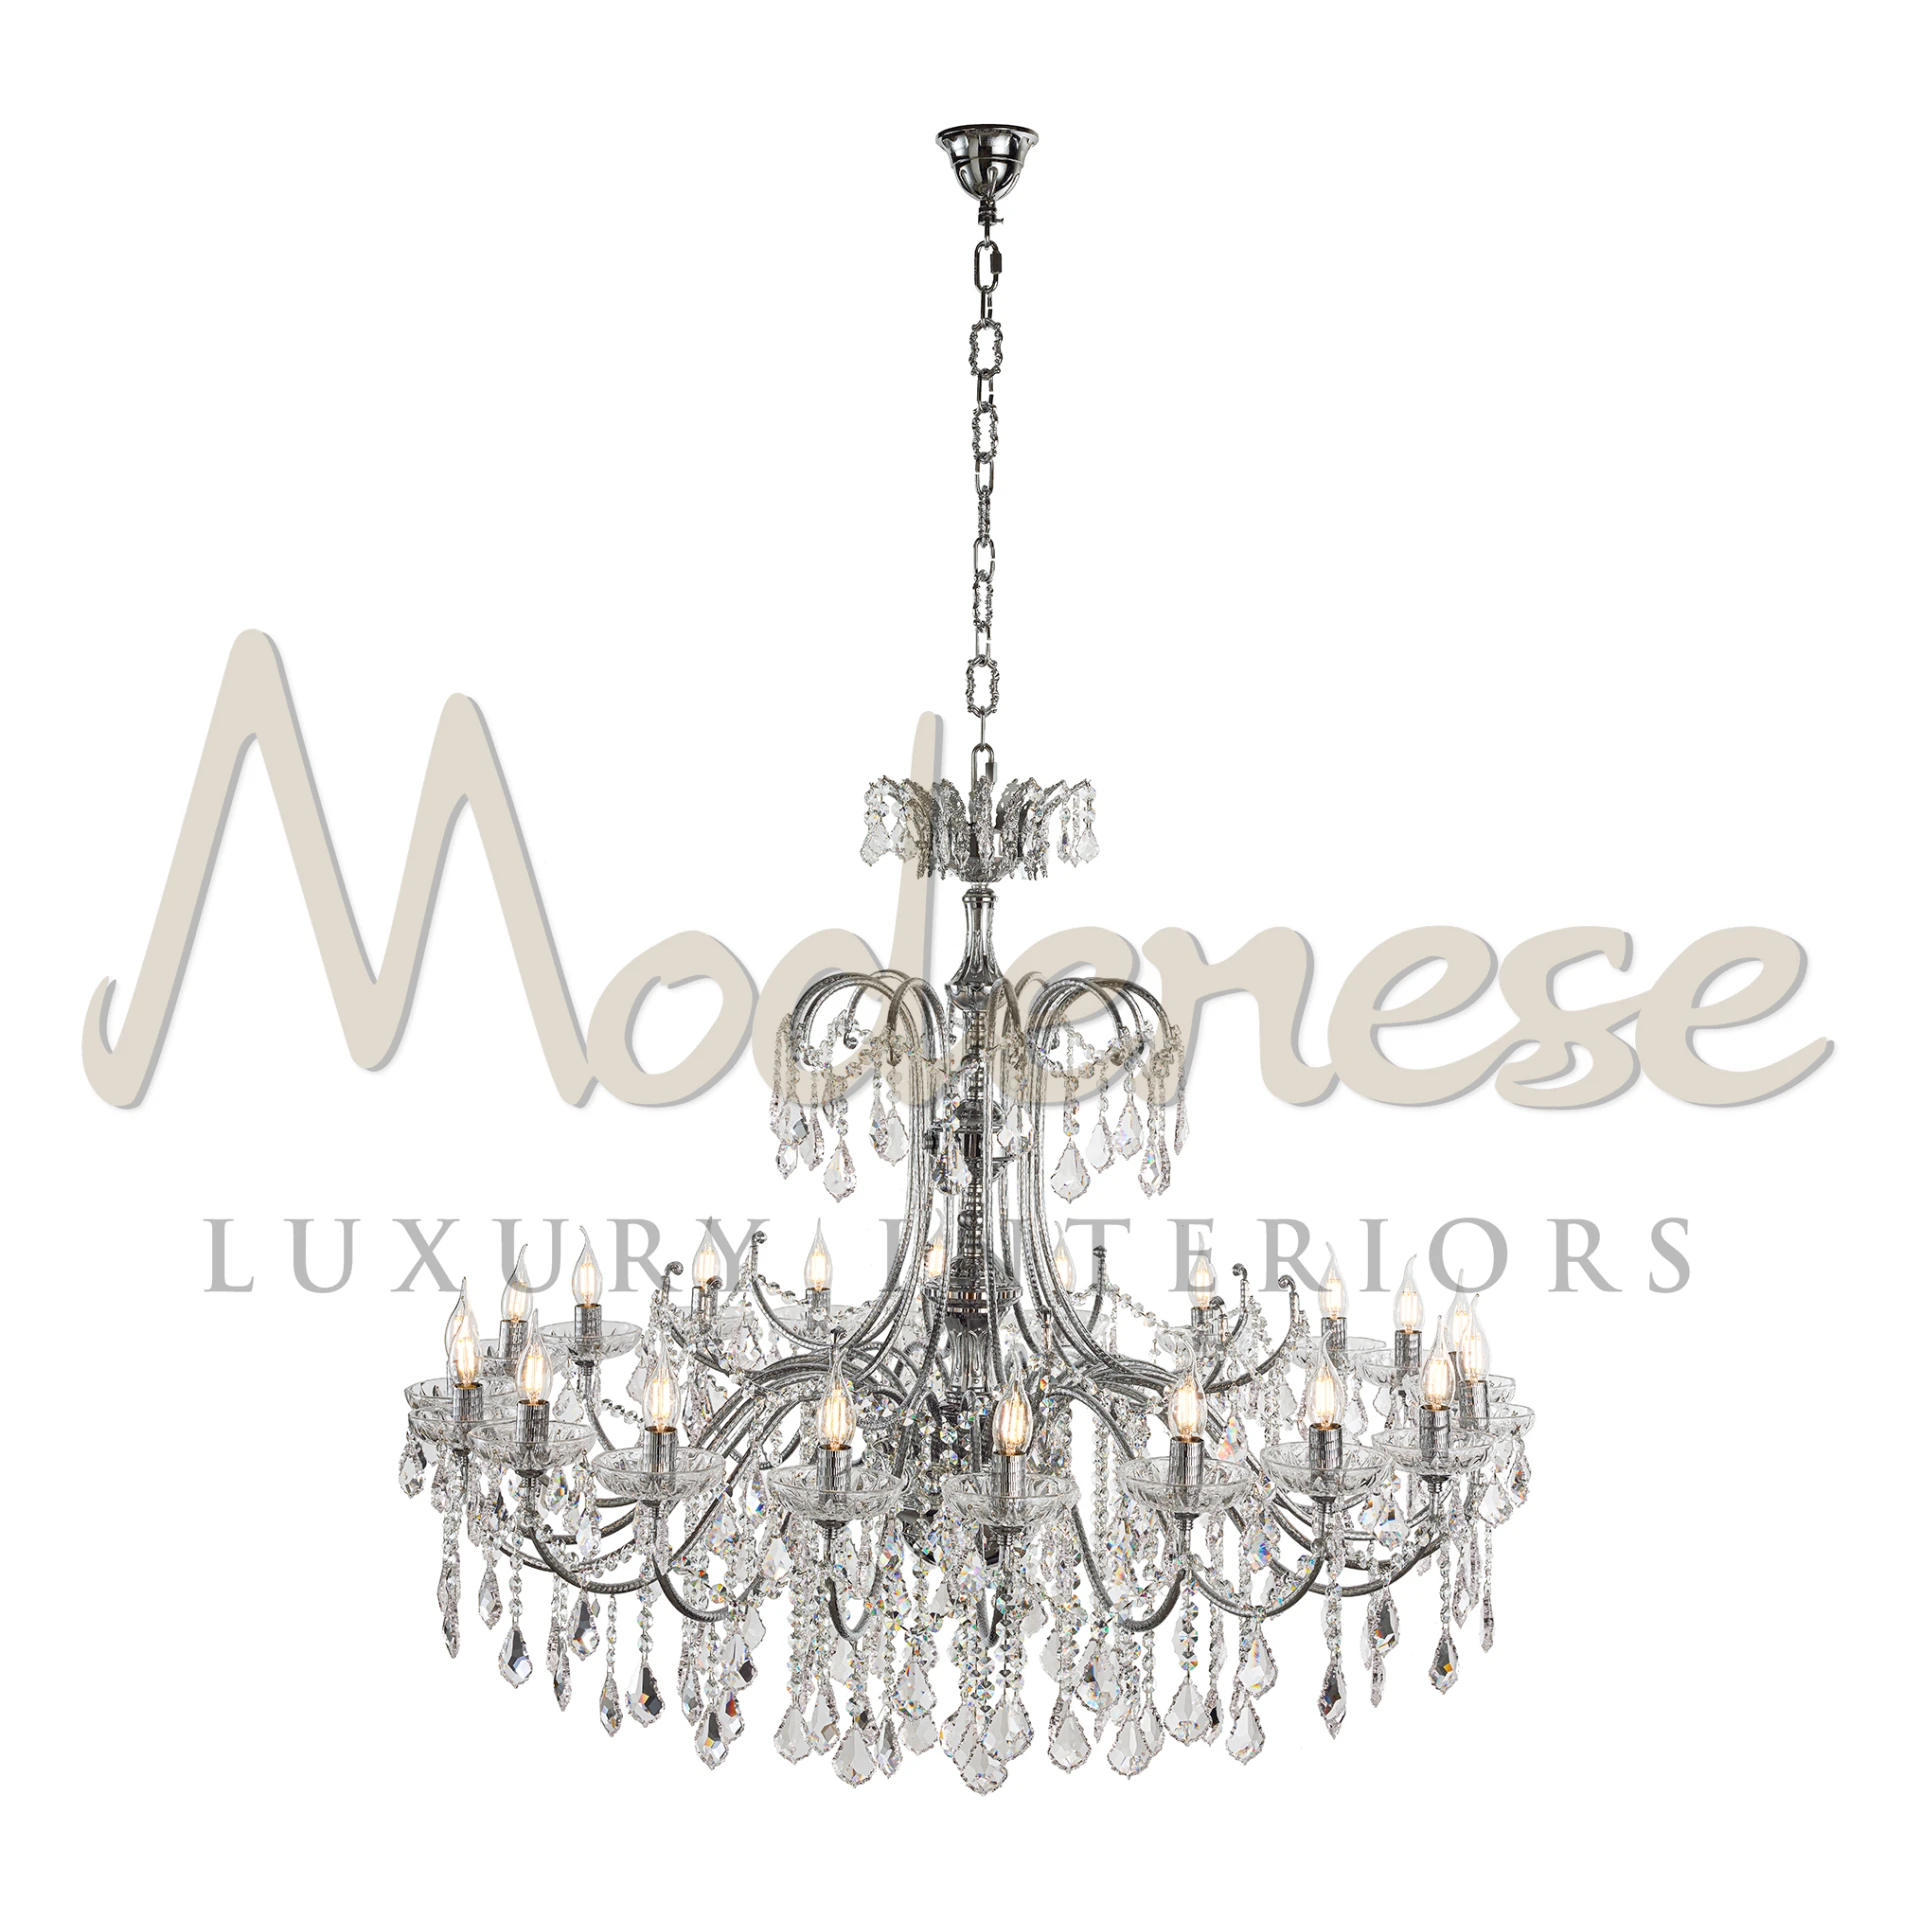 Luxury Italian Regal Elegance Crystal Chandelier with a grand display of crystals hanging from a decorative metal frame